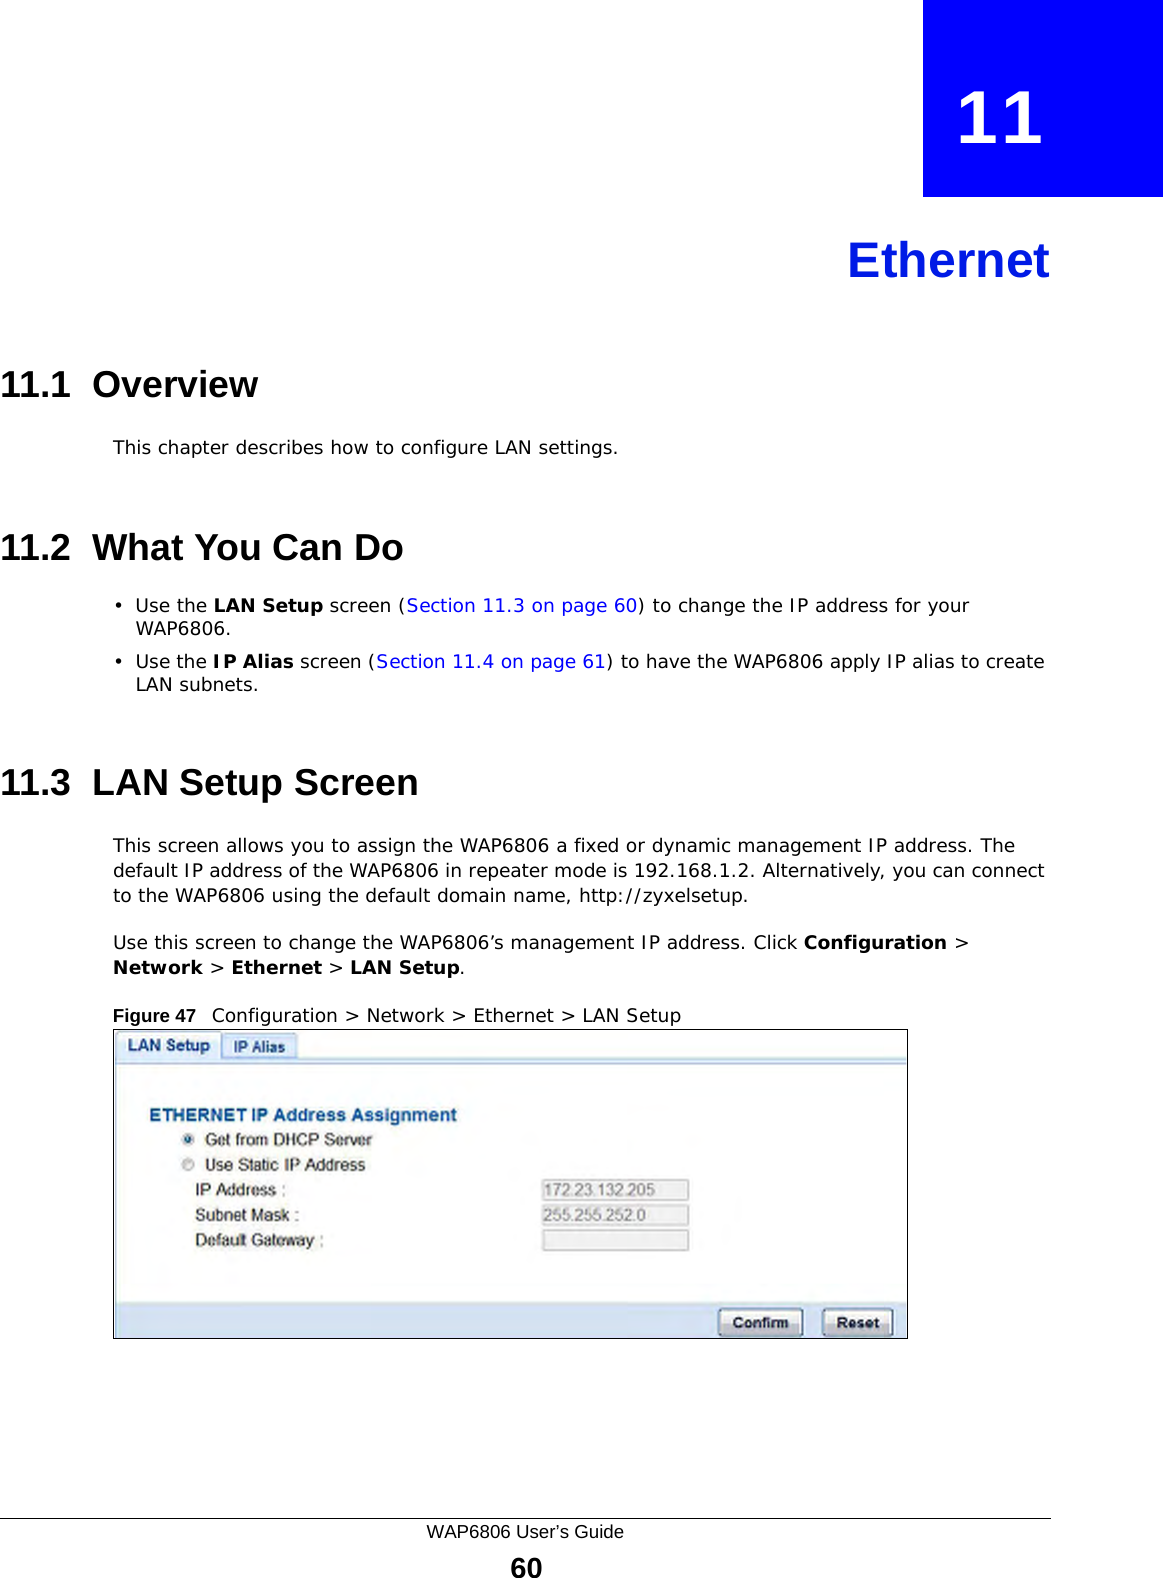 WAP6806 User’s Guide60CHAPTER   11Ethernet11.1  OverviewThis chapter describes how to configure LAN settings.11.2  What You Can Do•Use the LAN Setup screen (Section 11.3 on page 60) to change the IP address for your WAP6806.•Use the IP Alias screen (Section 11.4 on page 61) to have the WAP6806 apply IP alias to create LAN subnets.11.3  LAN Setup ScreenThis screen allows you to assign the WAP6806 a fixed or dynamic management IP address. The default IP address of the WAP6806 in repeater mode is 192.168.1.2. Alternatively, you can connect to the WAP6806 using the default domain name, http://zyxelsetup.Use this screen to change the WAP6806’s management IP address. Click Configuration &gt; Network &gt; Ethernet &gt; LAN Setup.Figure 47   Configuration &gt; Network &gt; Ethernet &gt; LAN Setup 